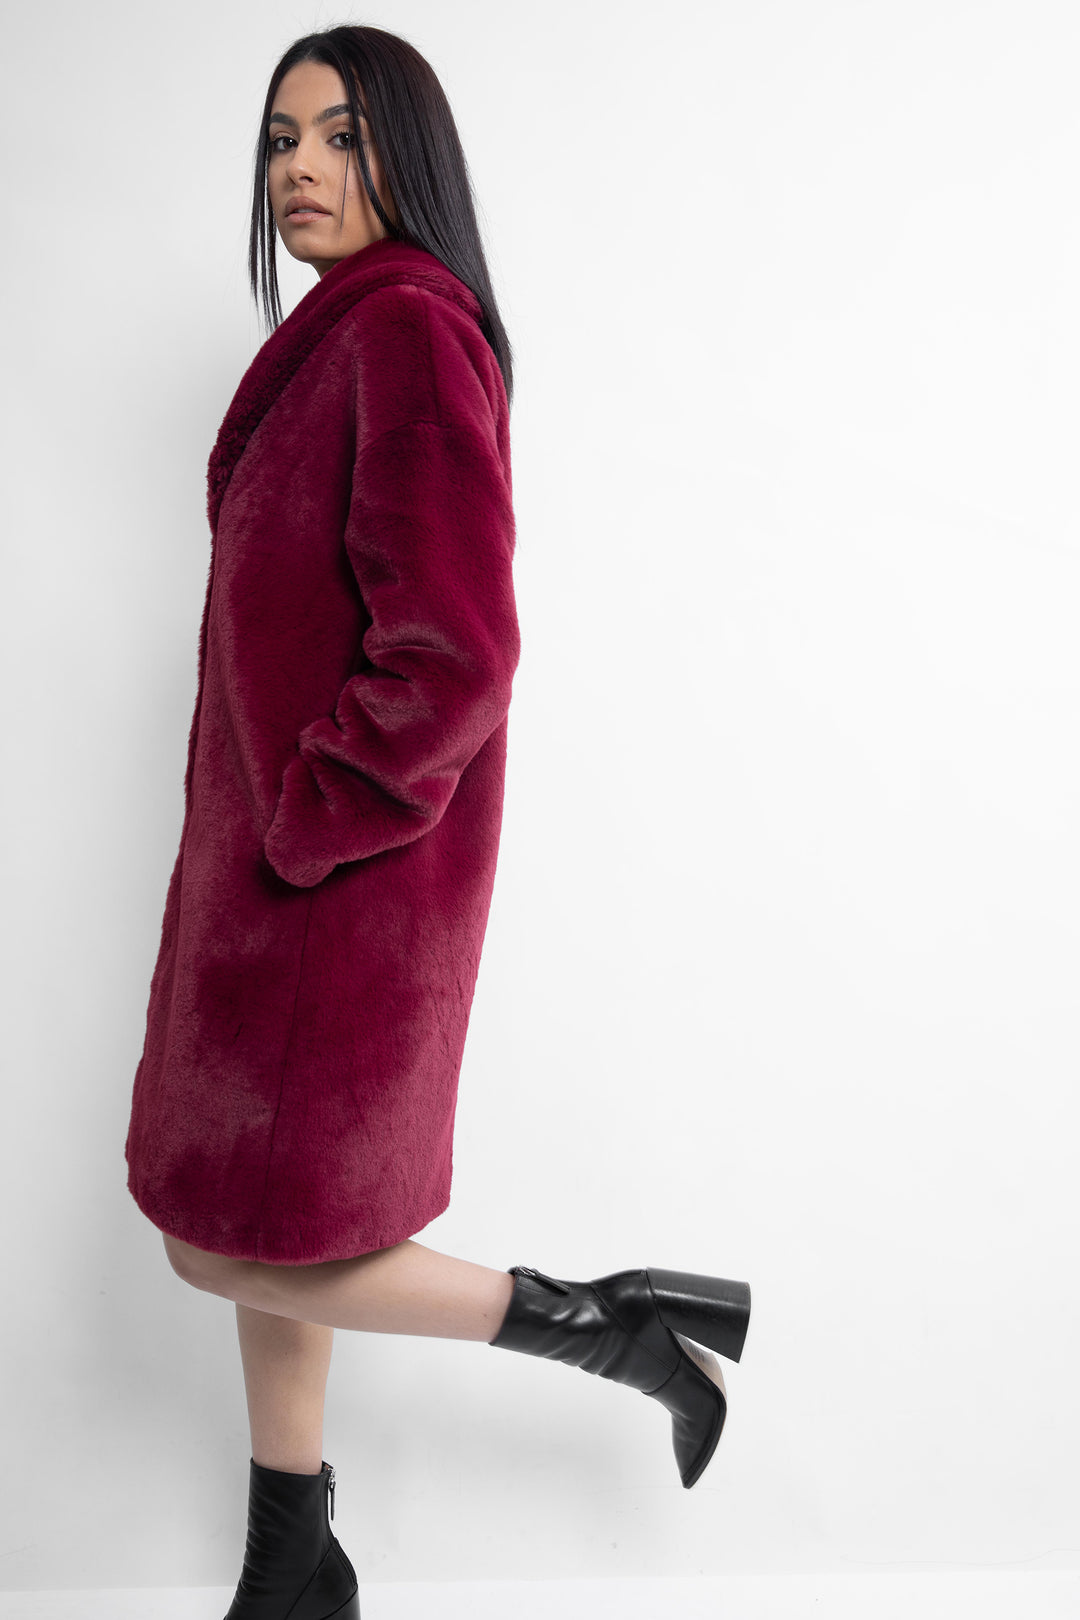 Faux fur coat available in Berry, cream and black | ANNA | Runway Secrets